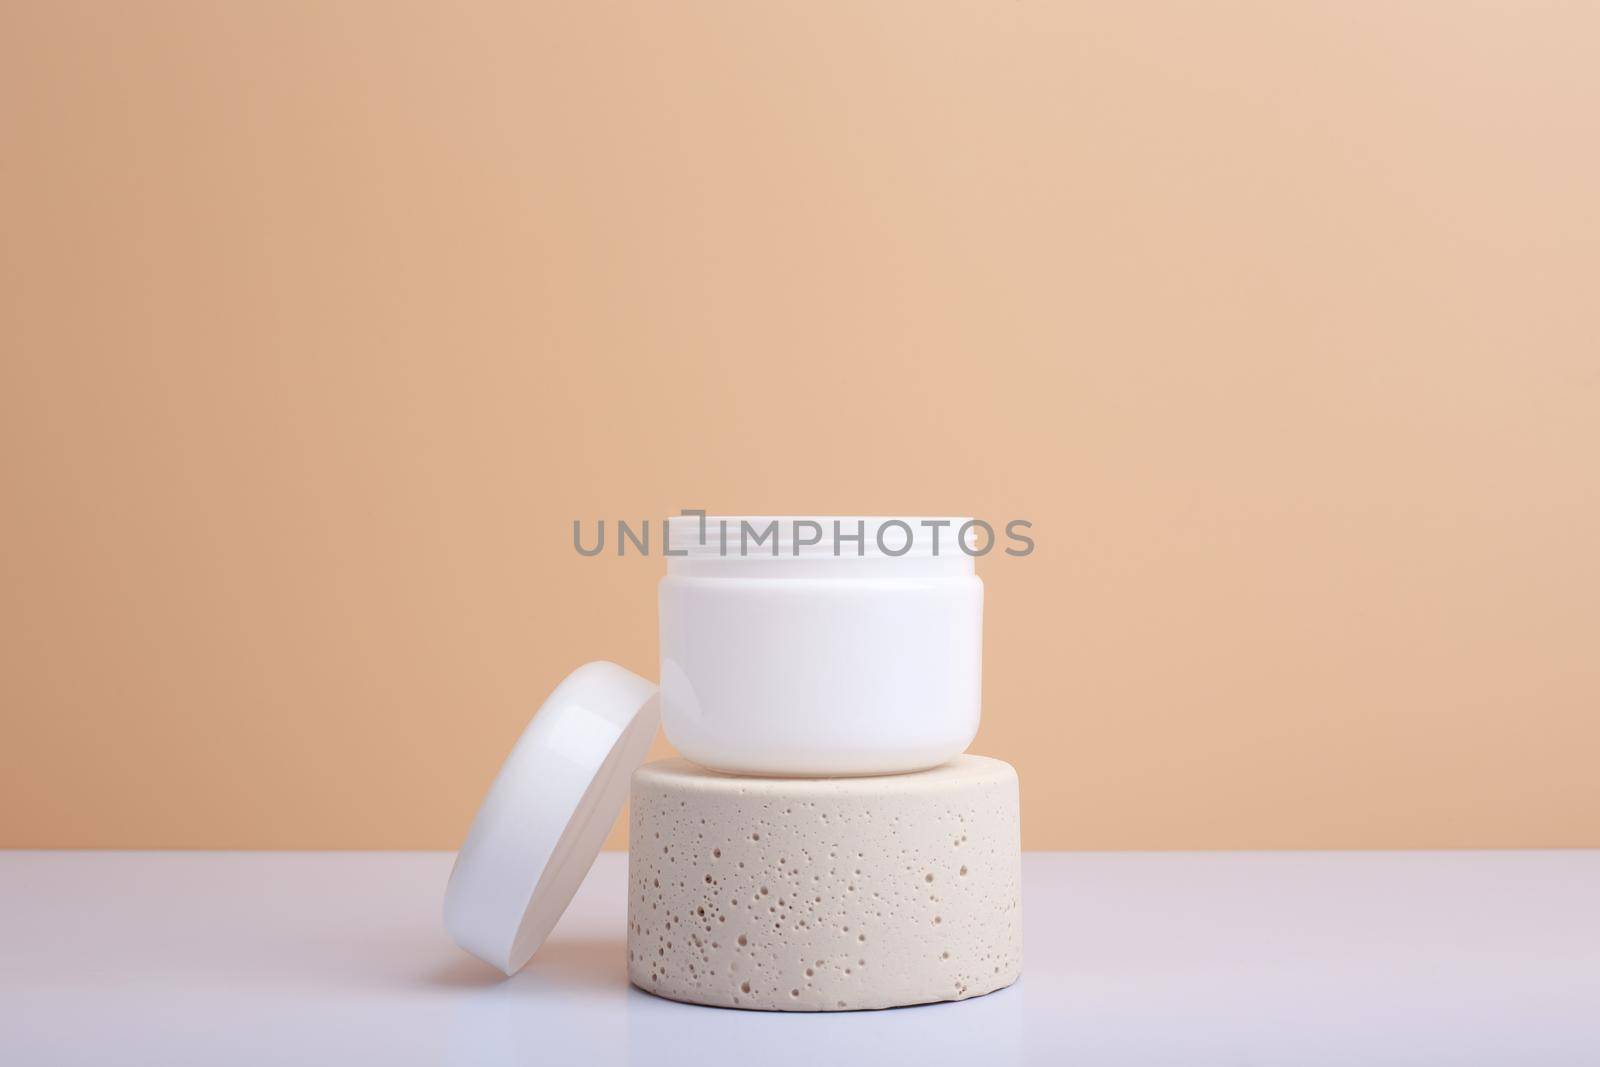 White opened cosmetic jar on beige podium and white table against beige background with copy space. Concept of beauty products for skin. Opened jar with balm, lotion, cream, scrub or mask.